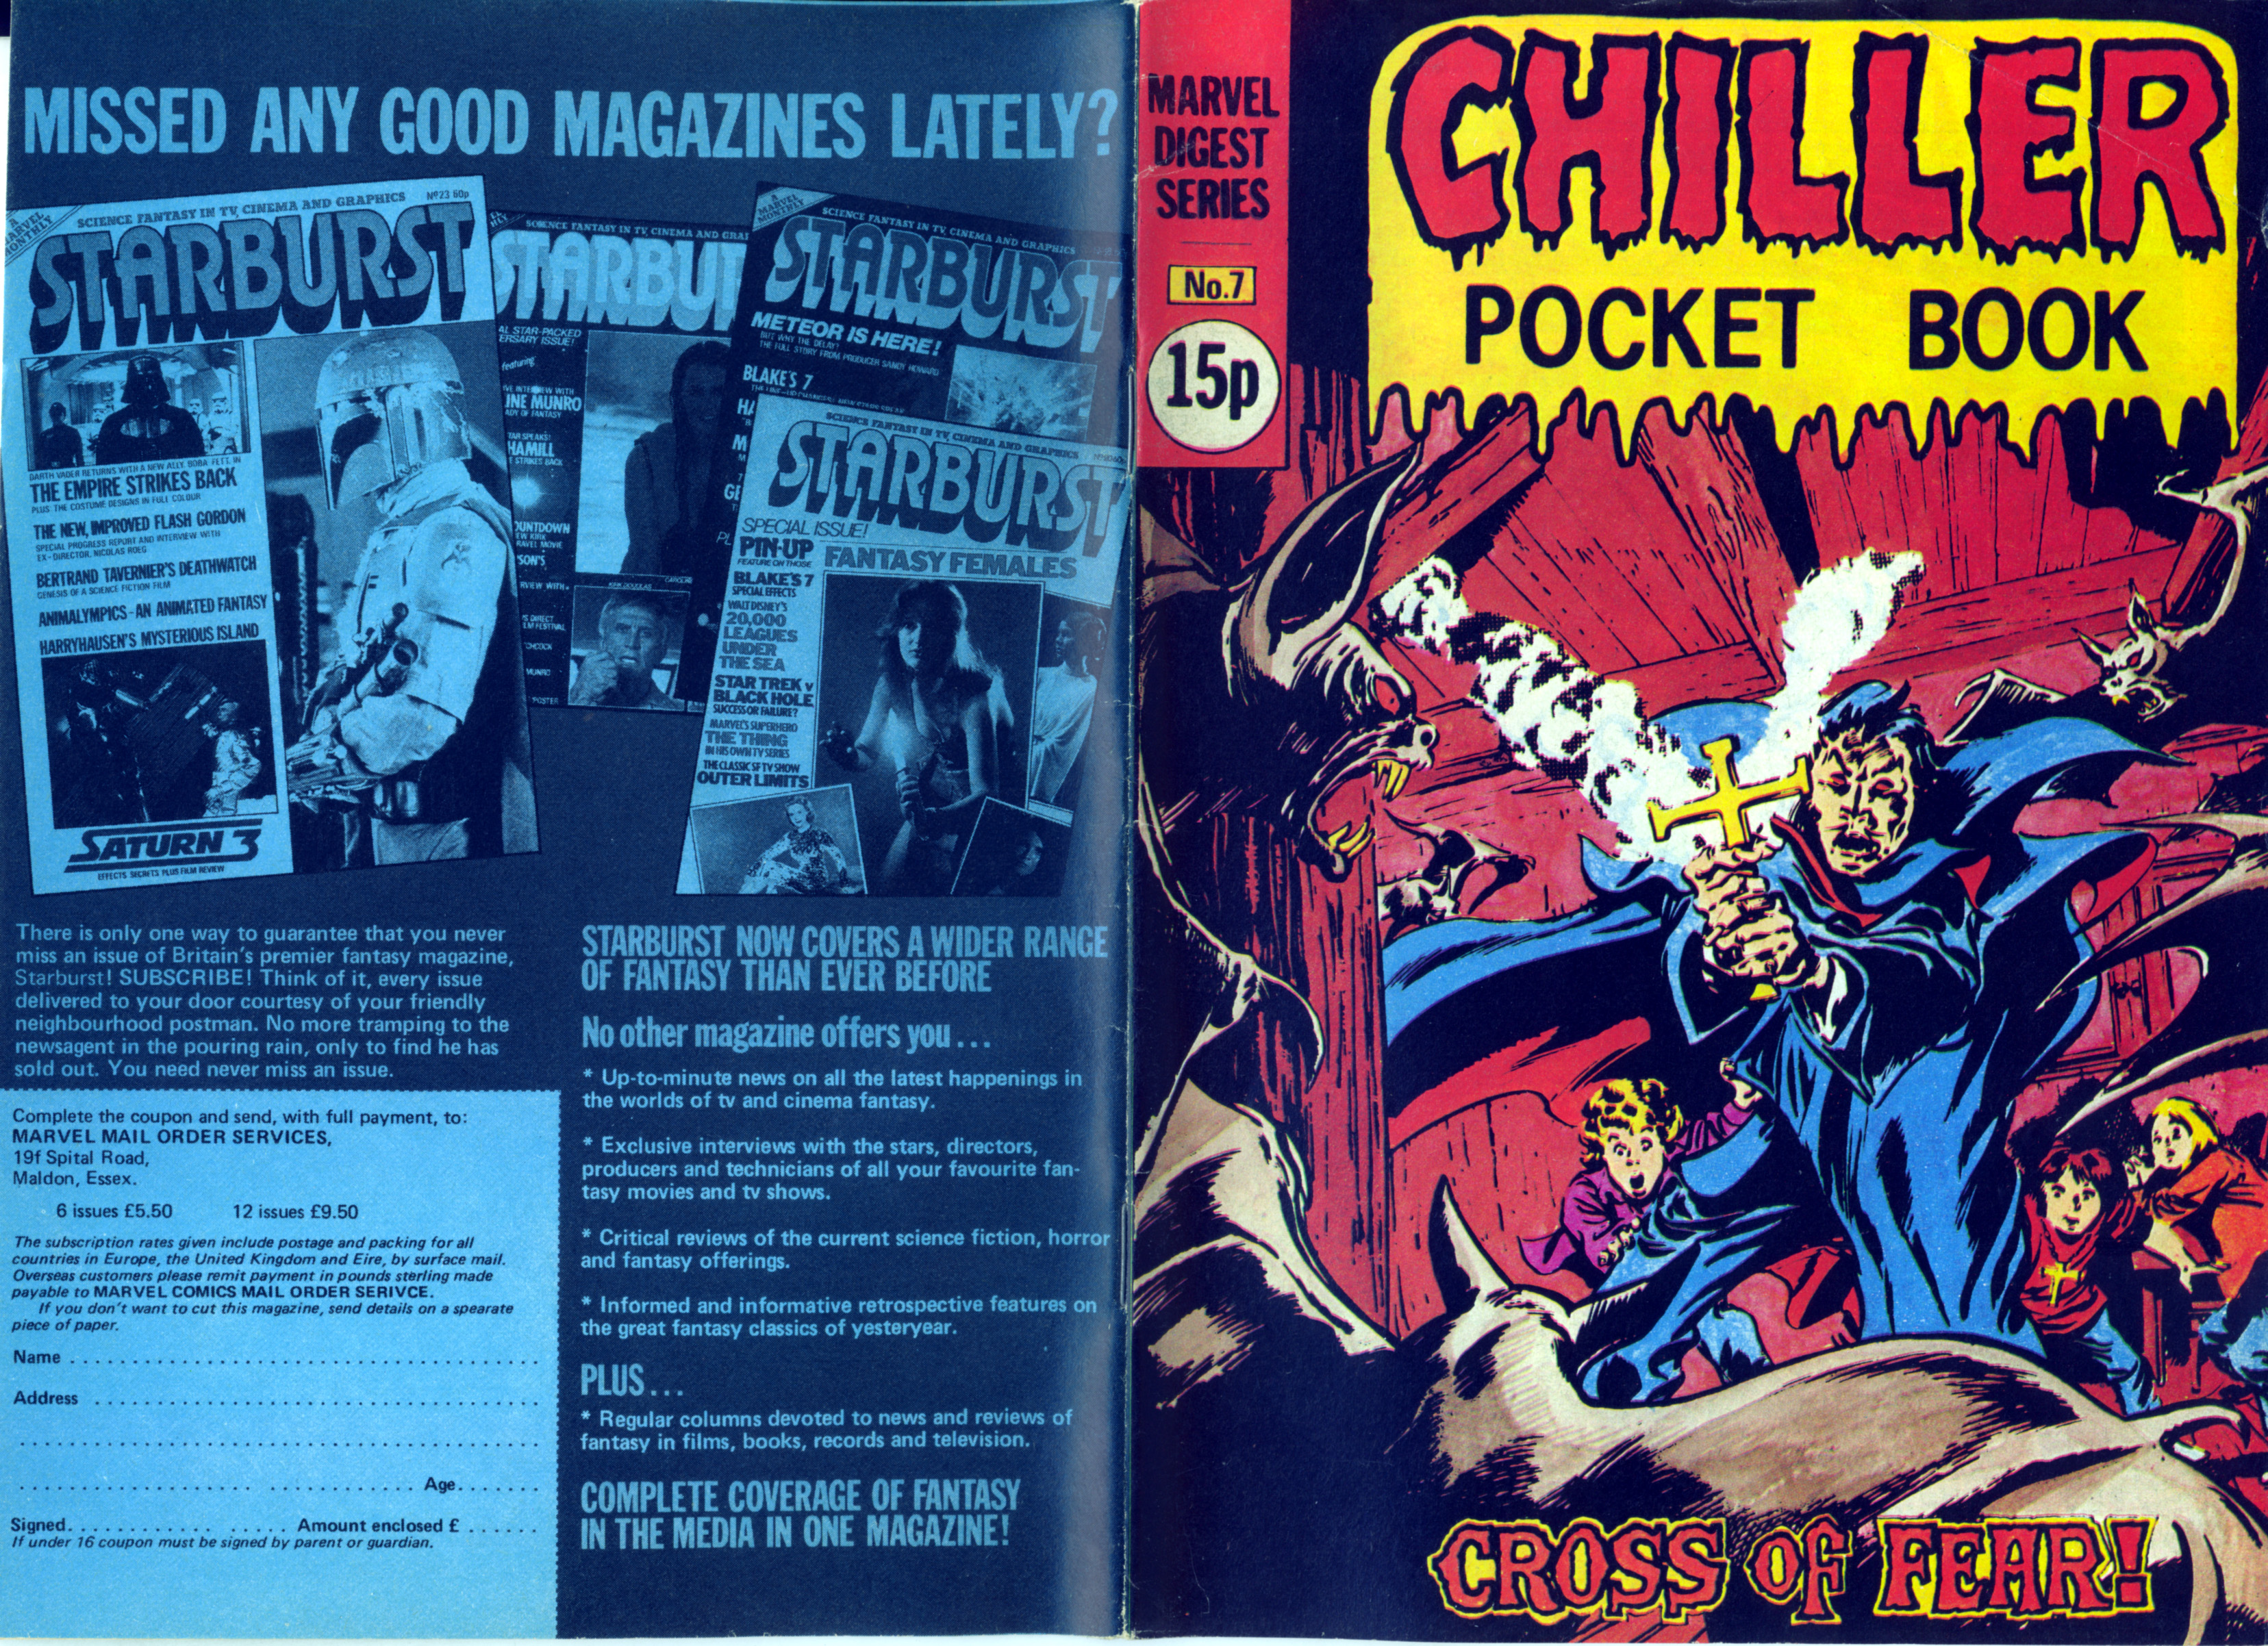 Read online Chiller Pocket Book comic -  Issue #7 - 2